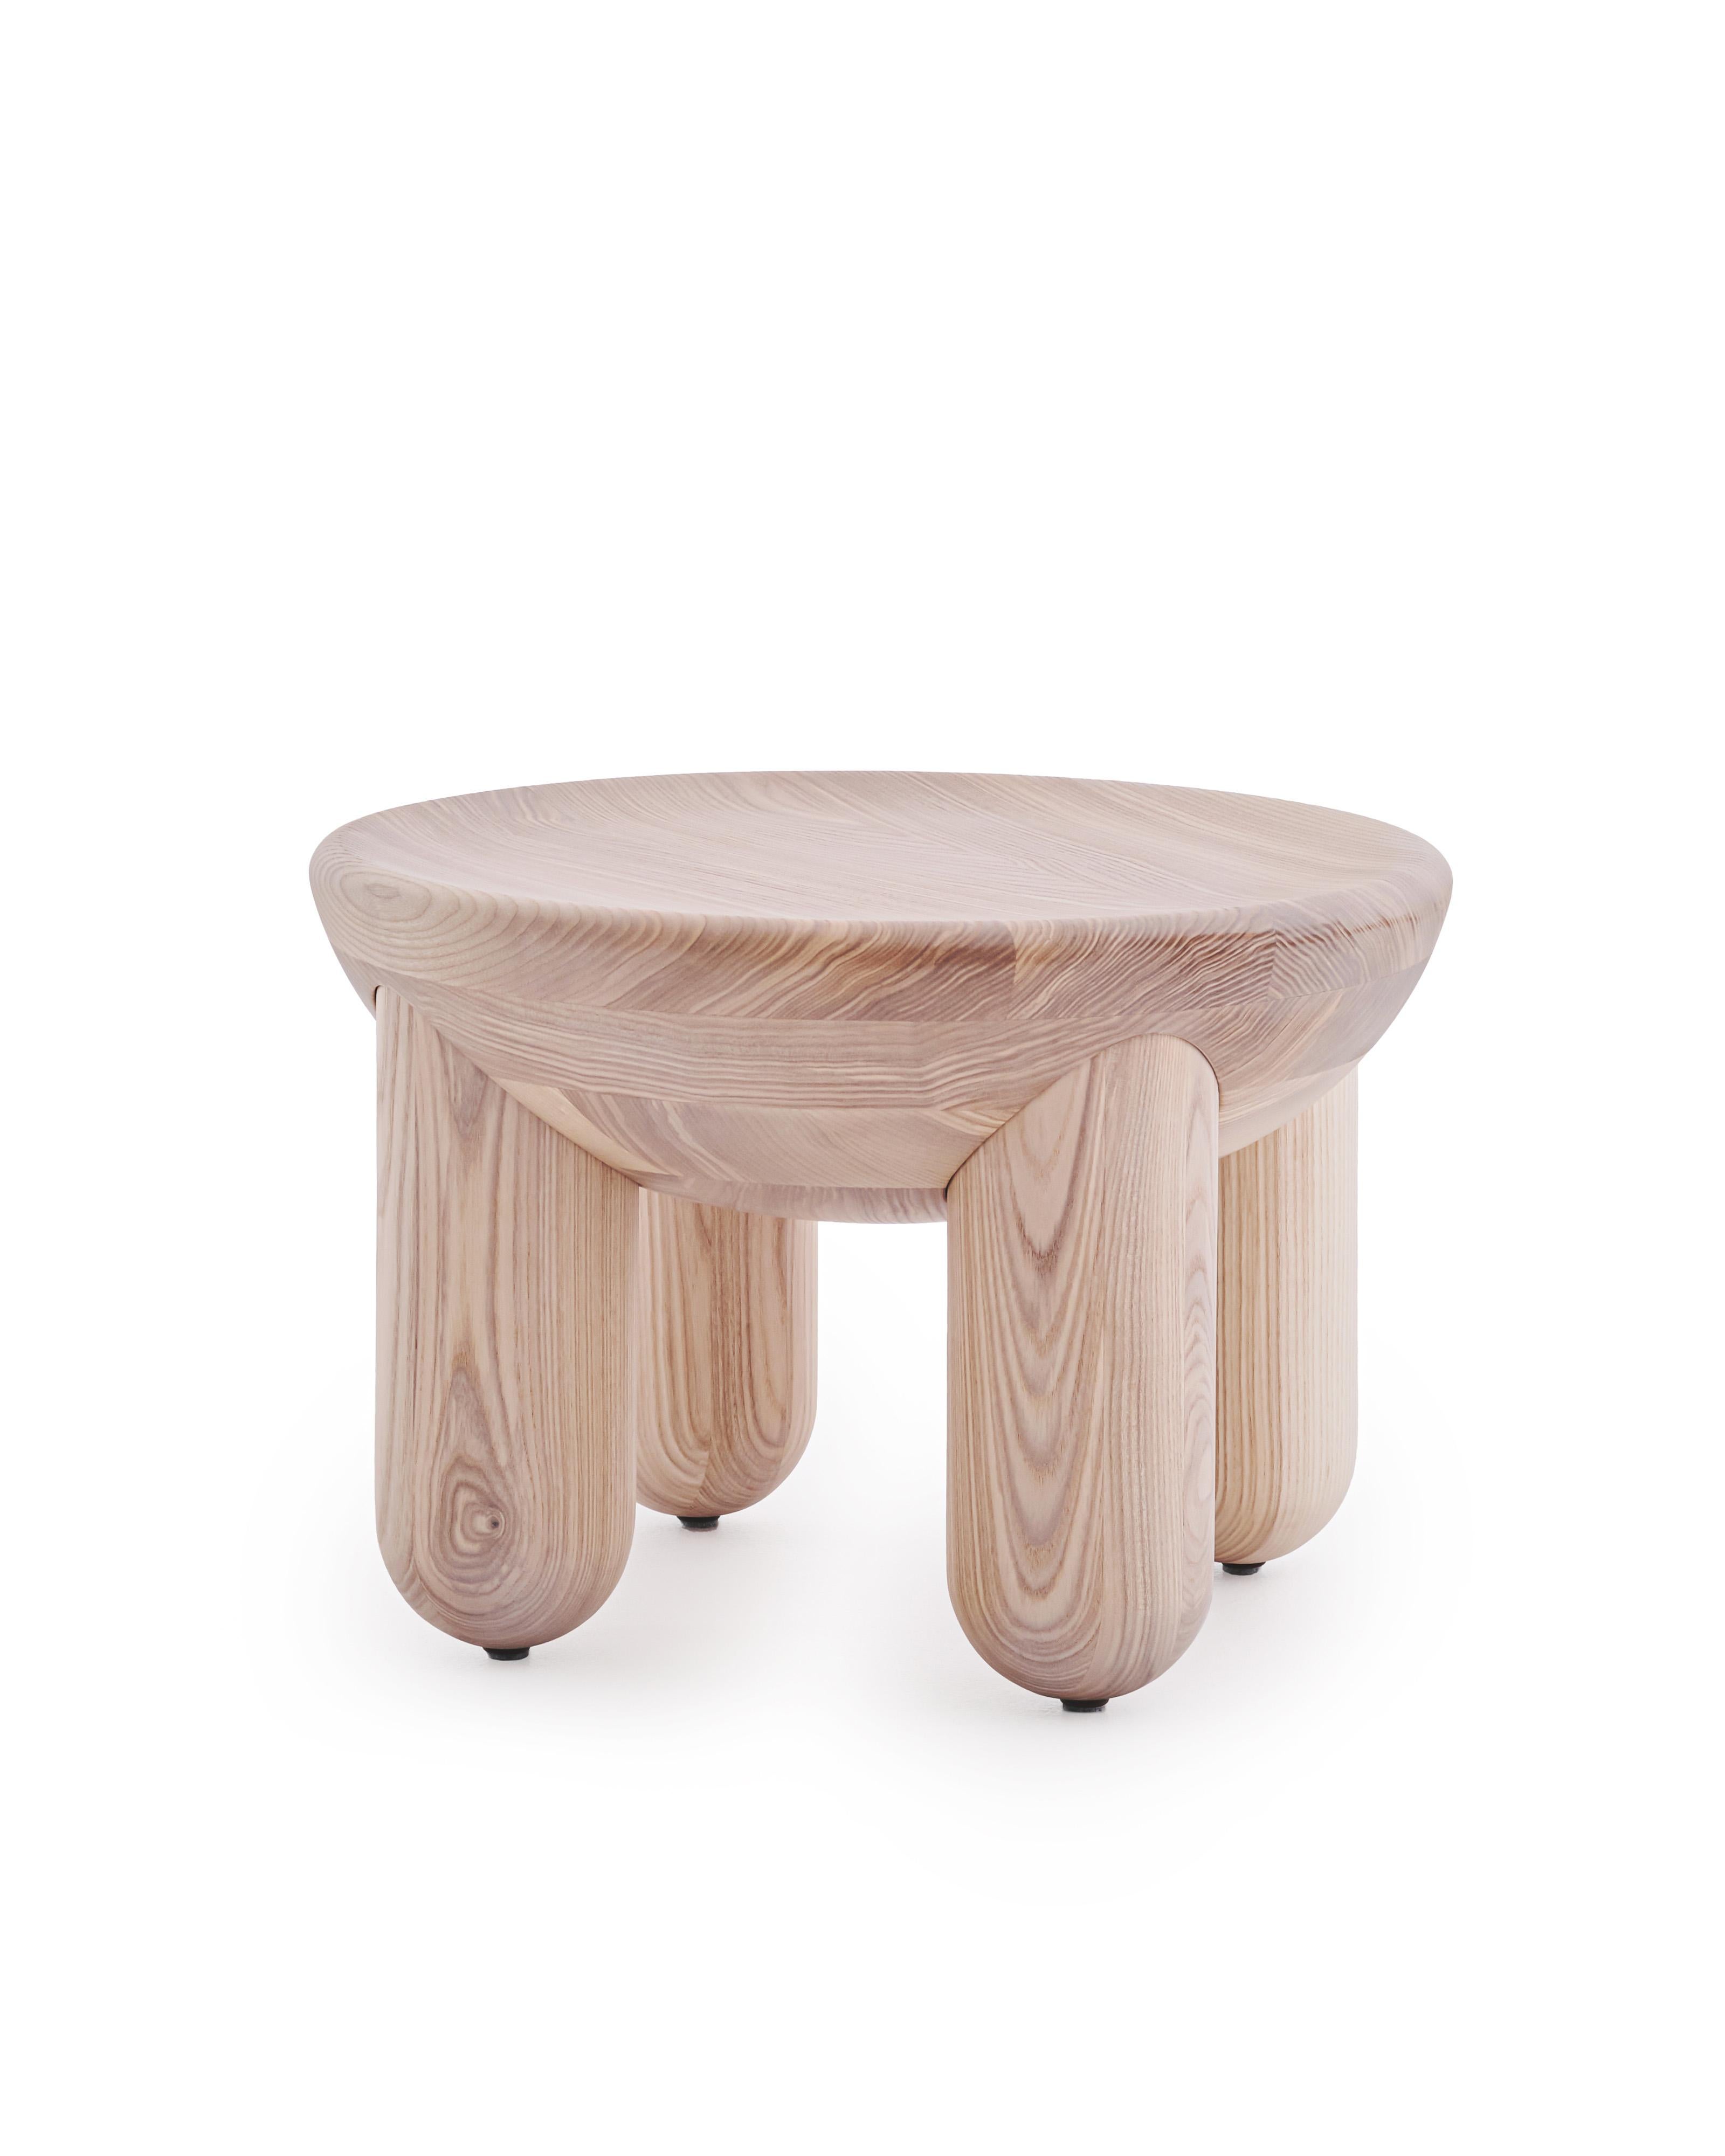 Wooden Coffee Table Freyja 1 in Brown Stained Ash finish by Noom 13